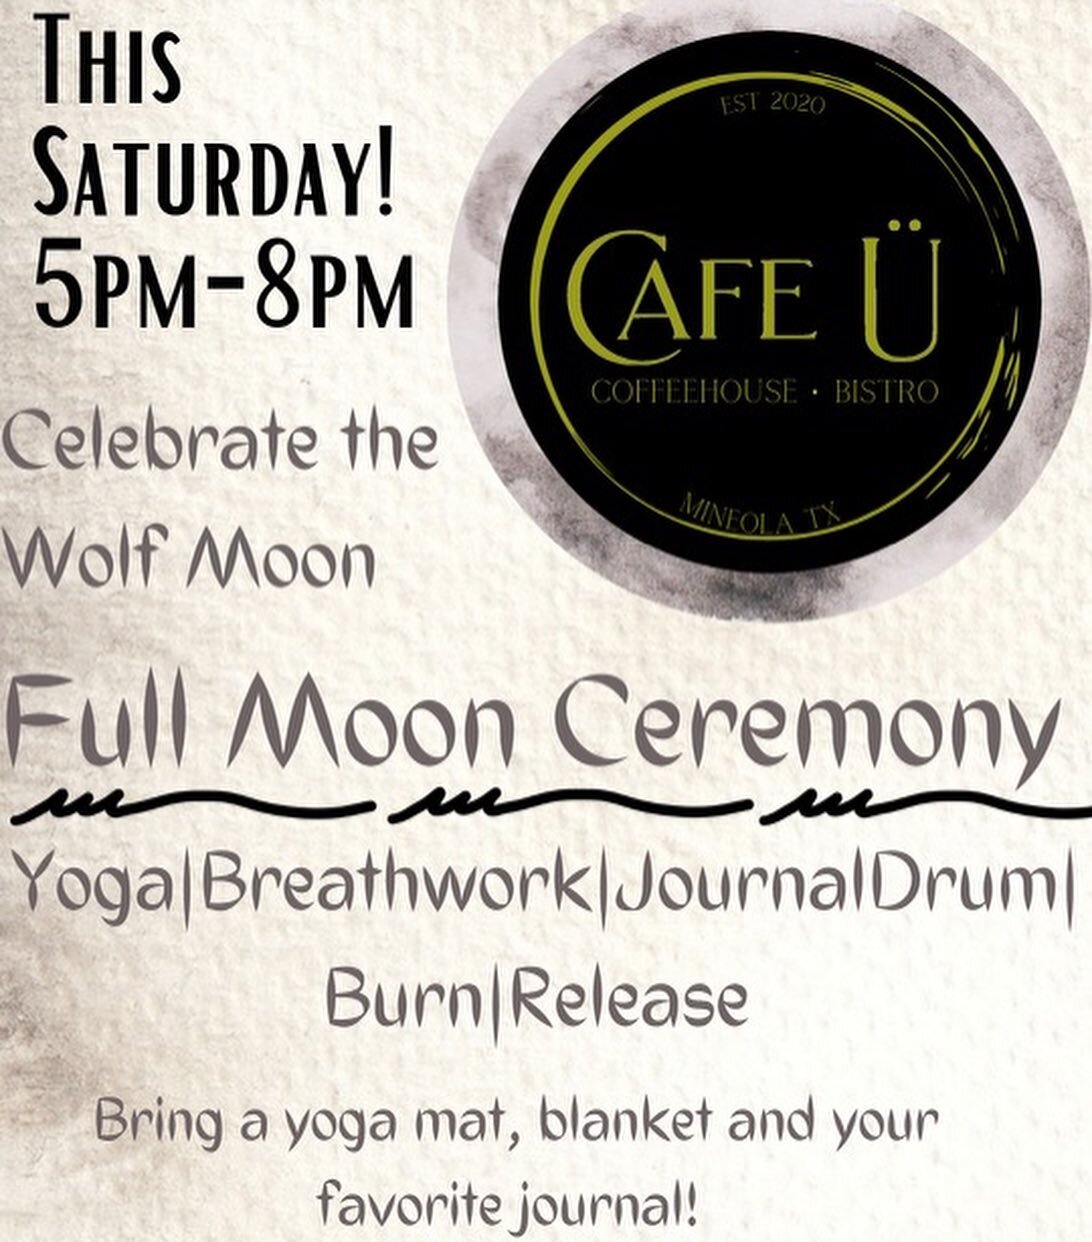 This Saturday y&rsquo;all!!!
🌟 January 7th
🕰️ 5:00 - 8:00 PM
☕️ Cafe &Uuml; Mineola, TX
🚙 202 North Newsom St.

💫 Release.  Let Go. Transform into the the New Year with us and celebrate the Wolf 🐺 Full Moon 🌕 where we will burn 🔥 what no longe